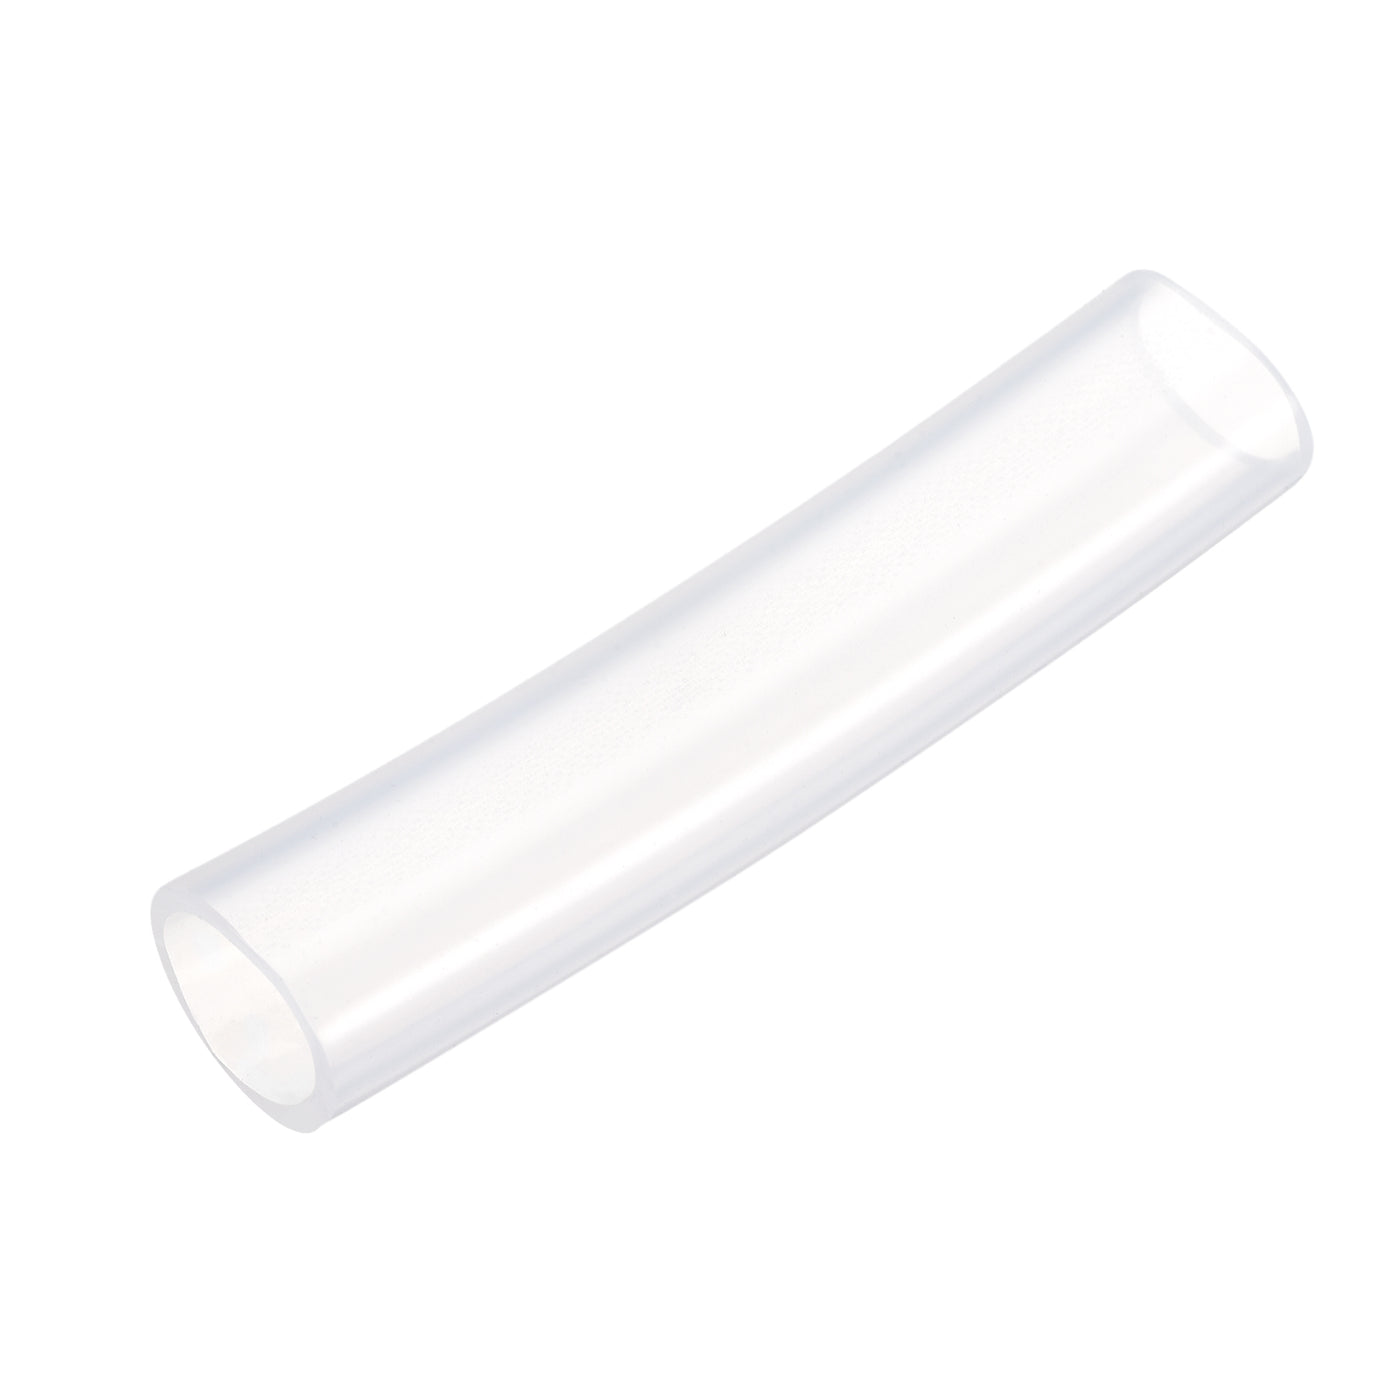 uxcell Uxcell Silicone Tubing 5/8" ID, 53/64" OD 1Pcs 0.33 Ft for Pump Transfer, Transparent